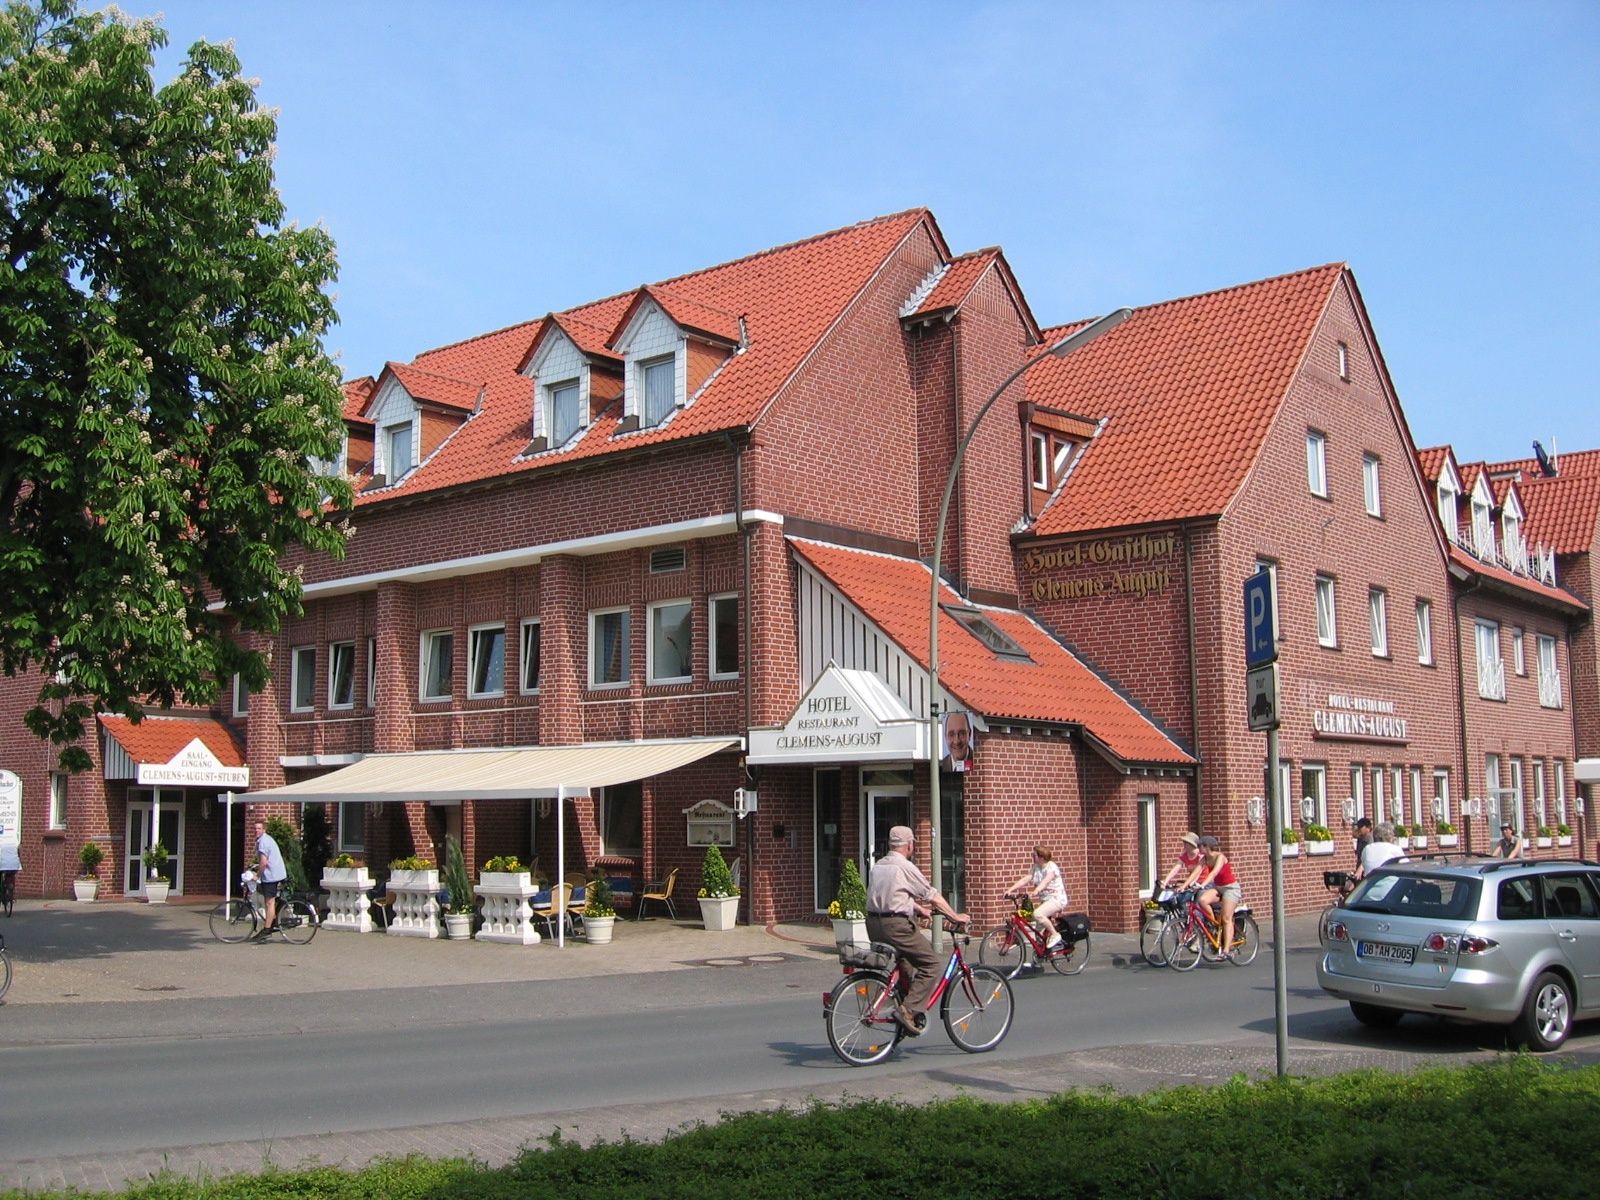 Hotel Restaurant Clemens August <br/>124.00 ew <br/> <a href='http://vakantieoplossing.nl/outpage/?id=ccf0f2283870d82a70fca949e0cae869' target='_blank'>View Details</a>